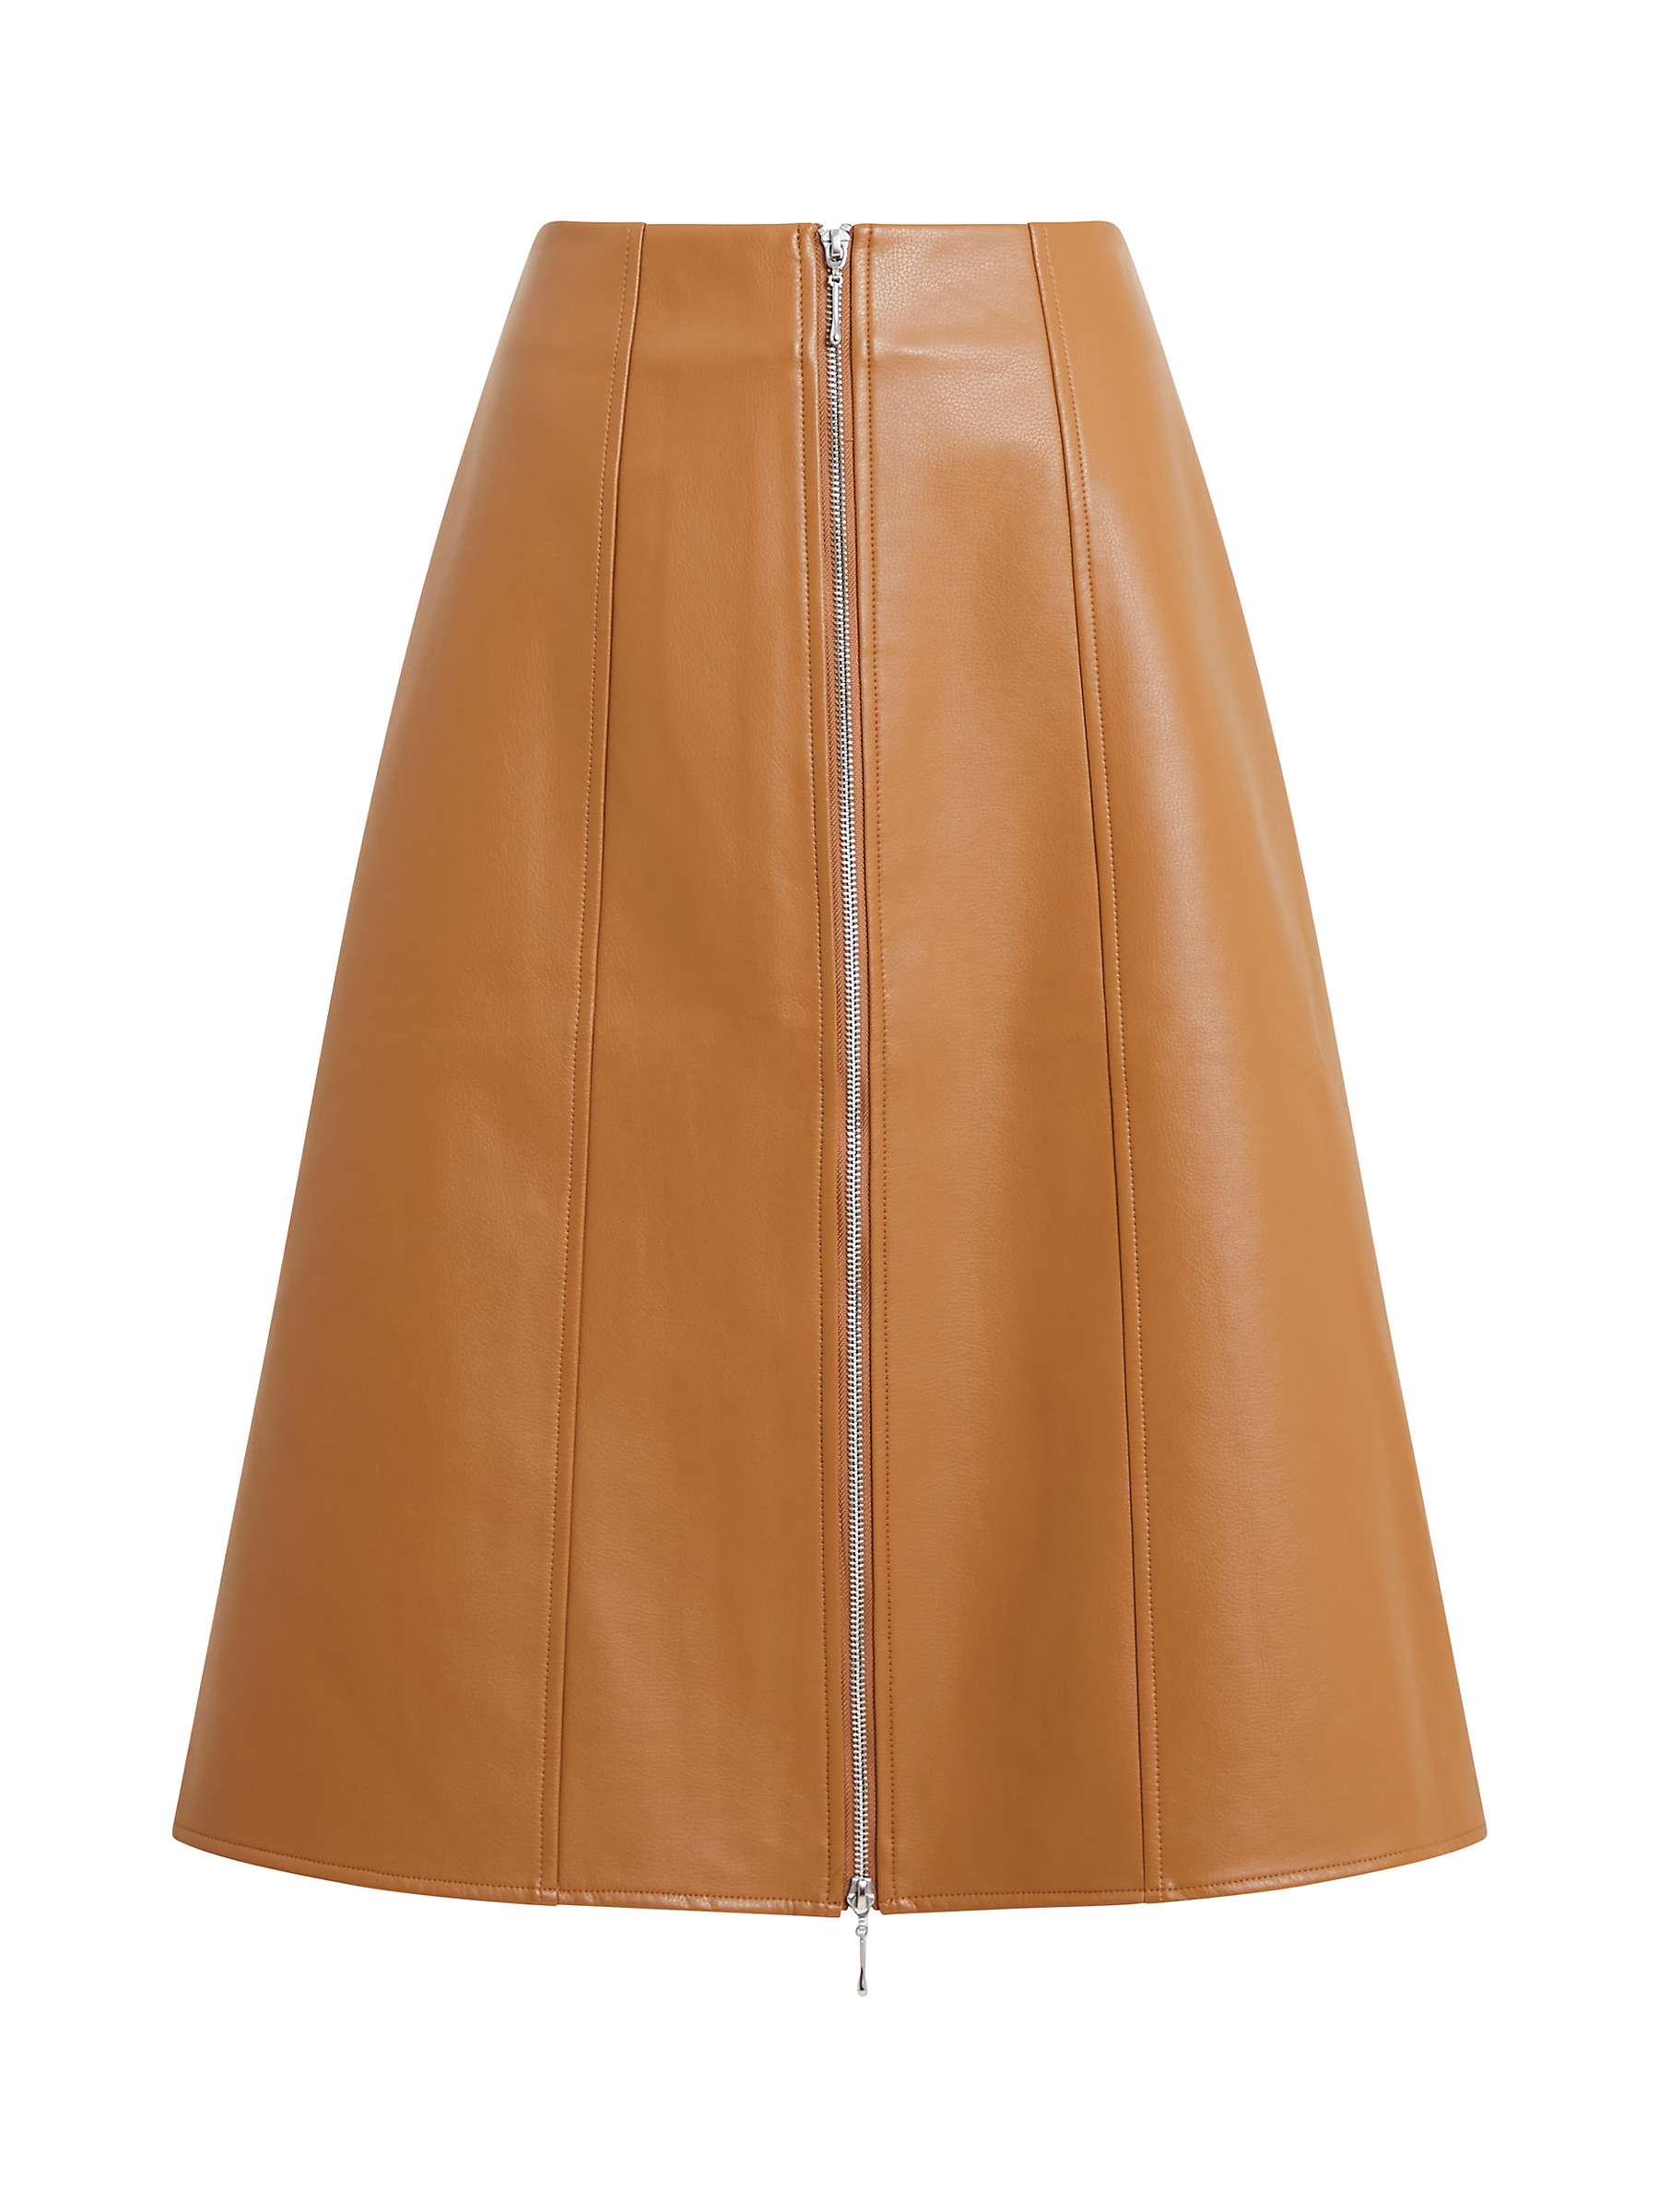 Buy French Connection Claudia PU Knee Length Skirt, Tobacco Brown Online at johnlewis.com